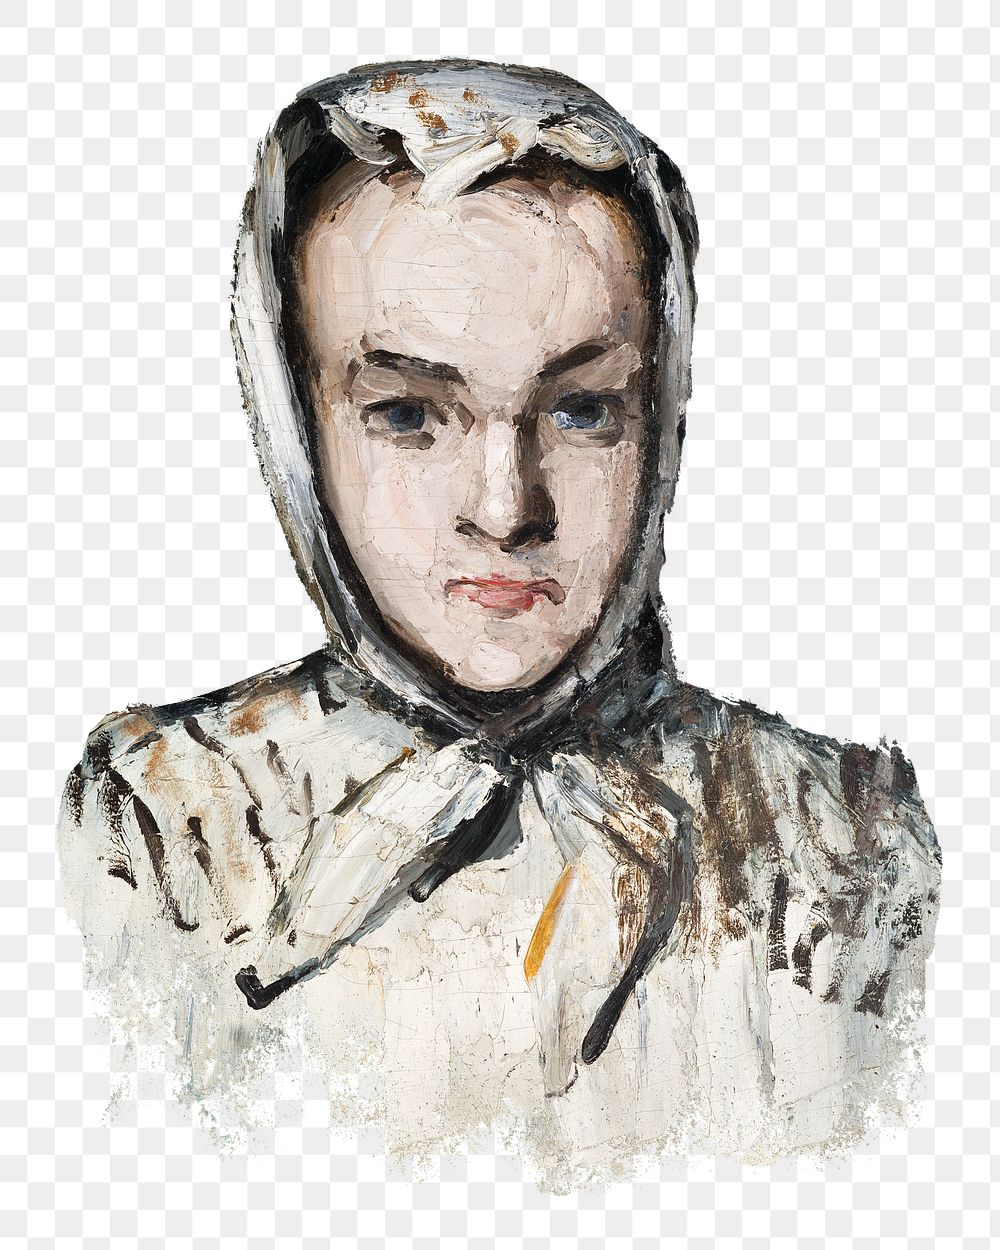 Png Marie C&eacute;zanne's Sister sticker, post-impressionist portrait painting, transparent background.  Remixed by…